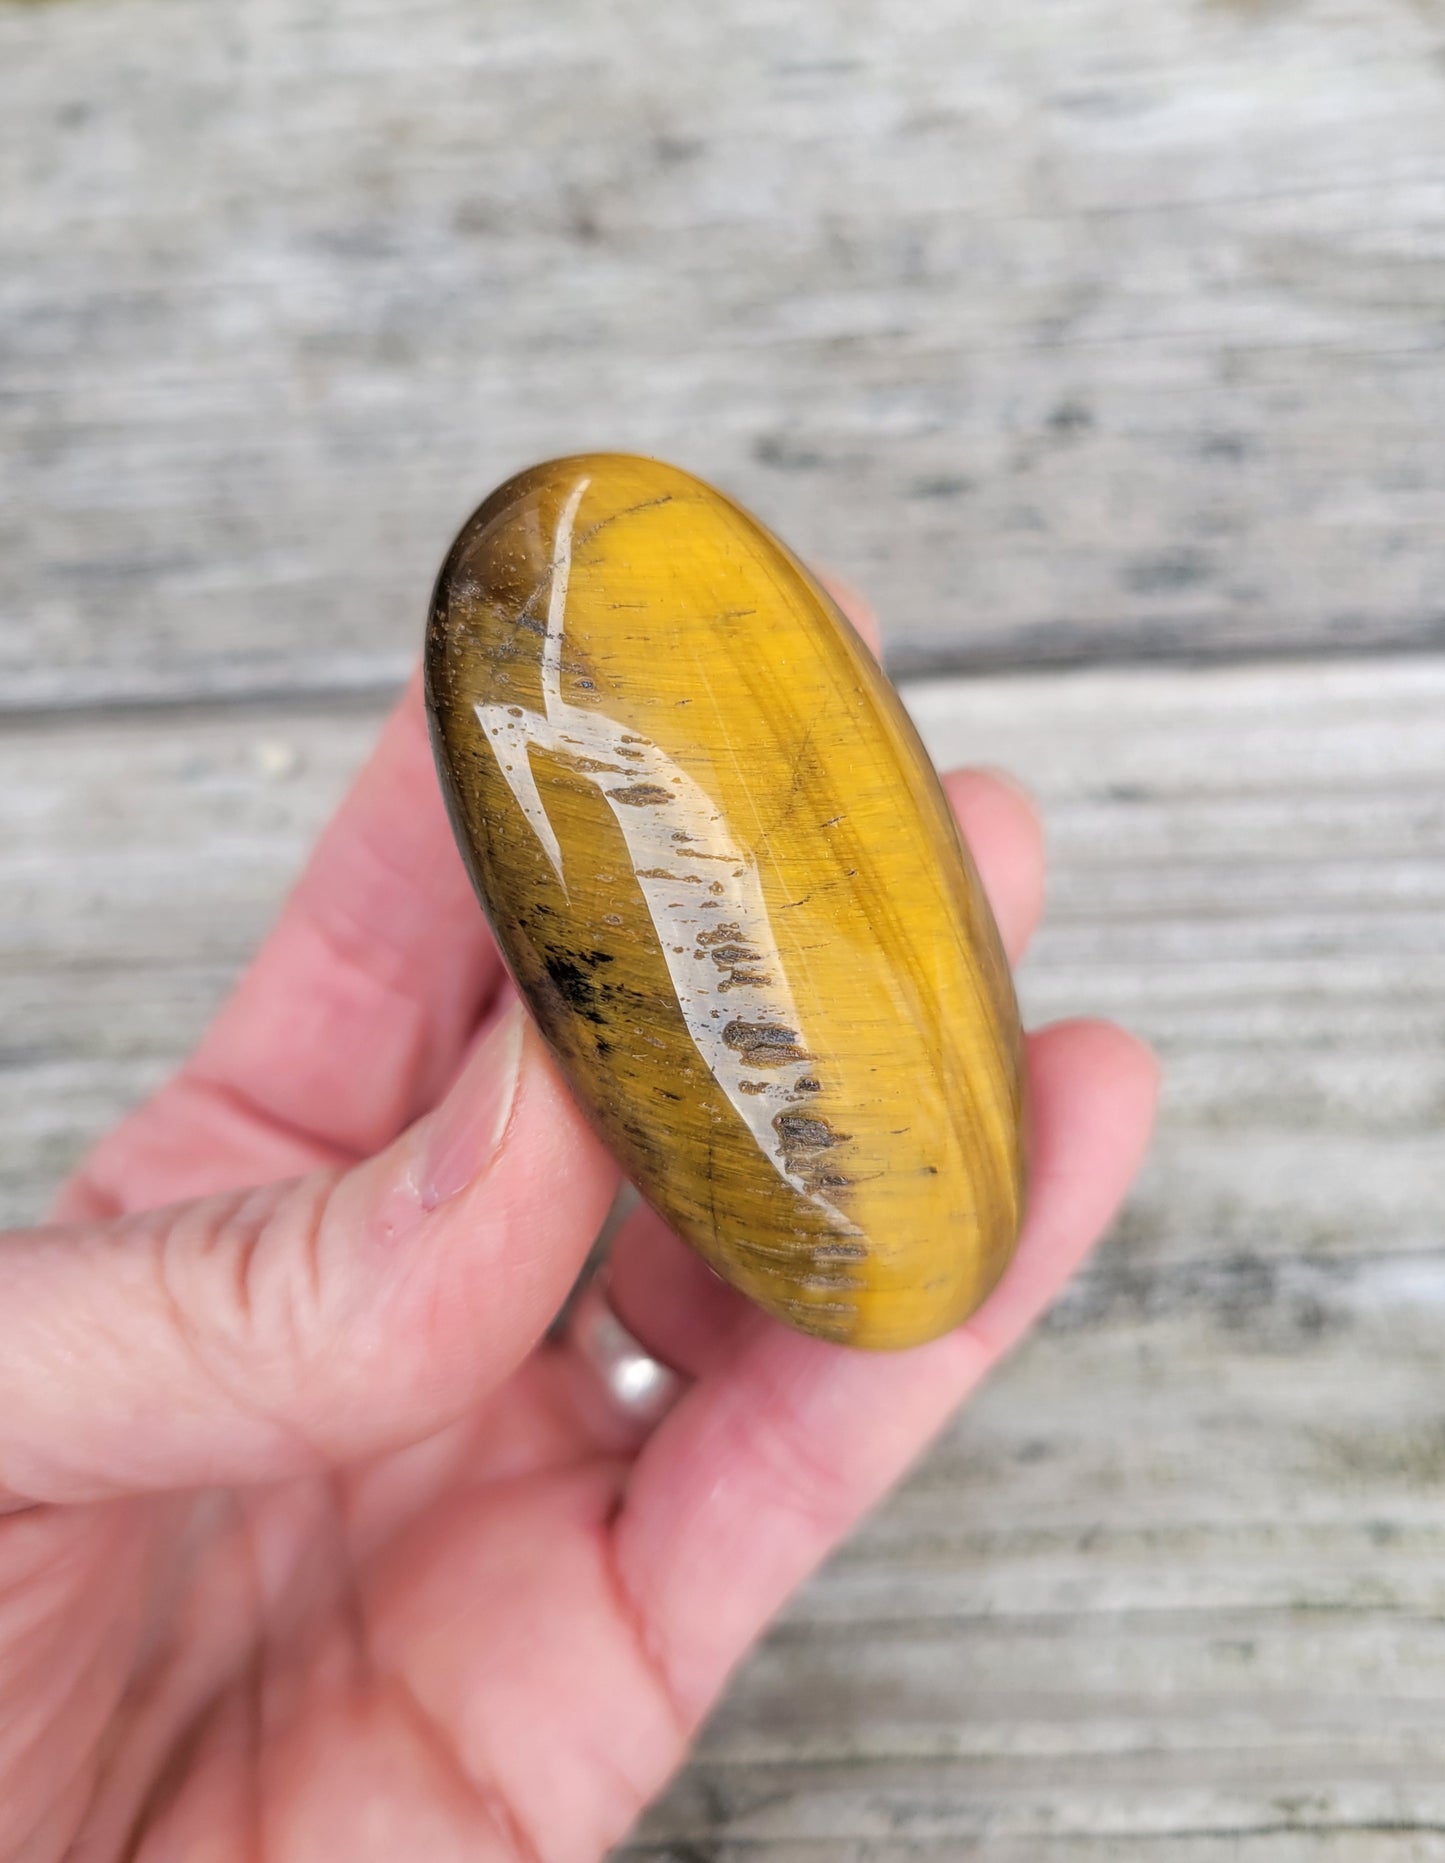 Tiger's Eye from South Africa